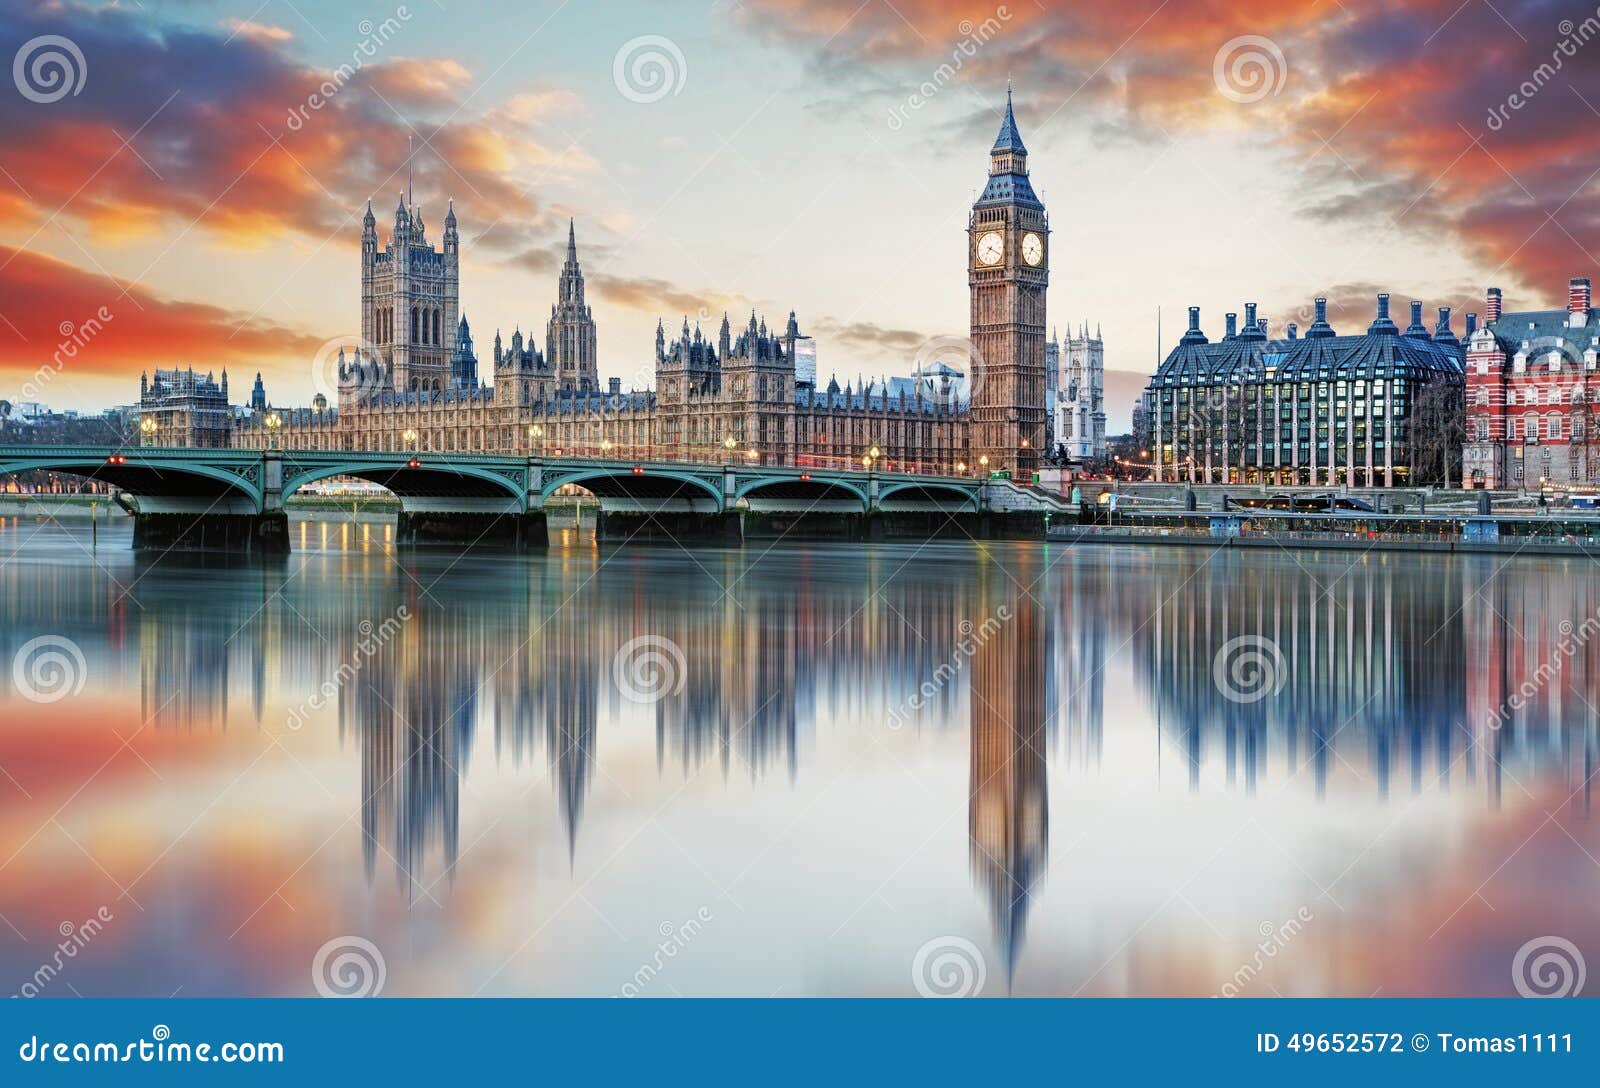 london - big ben and houses of parliament, uk